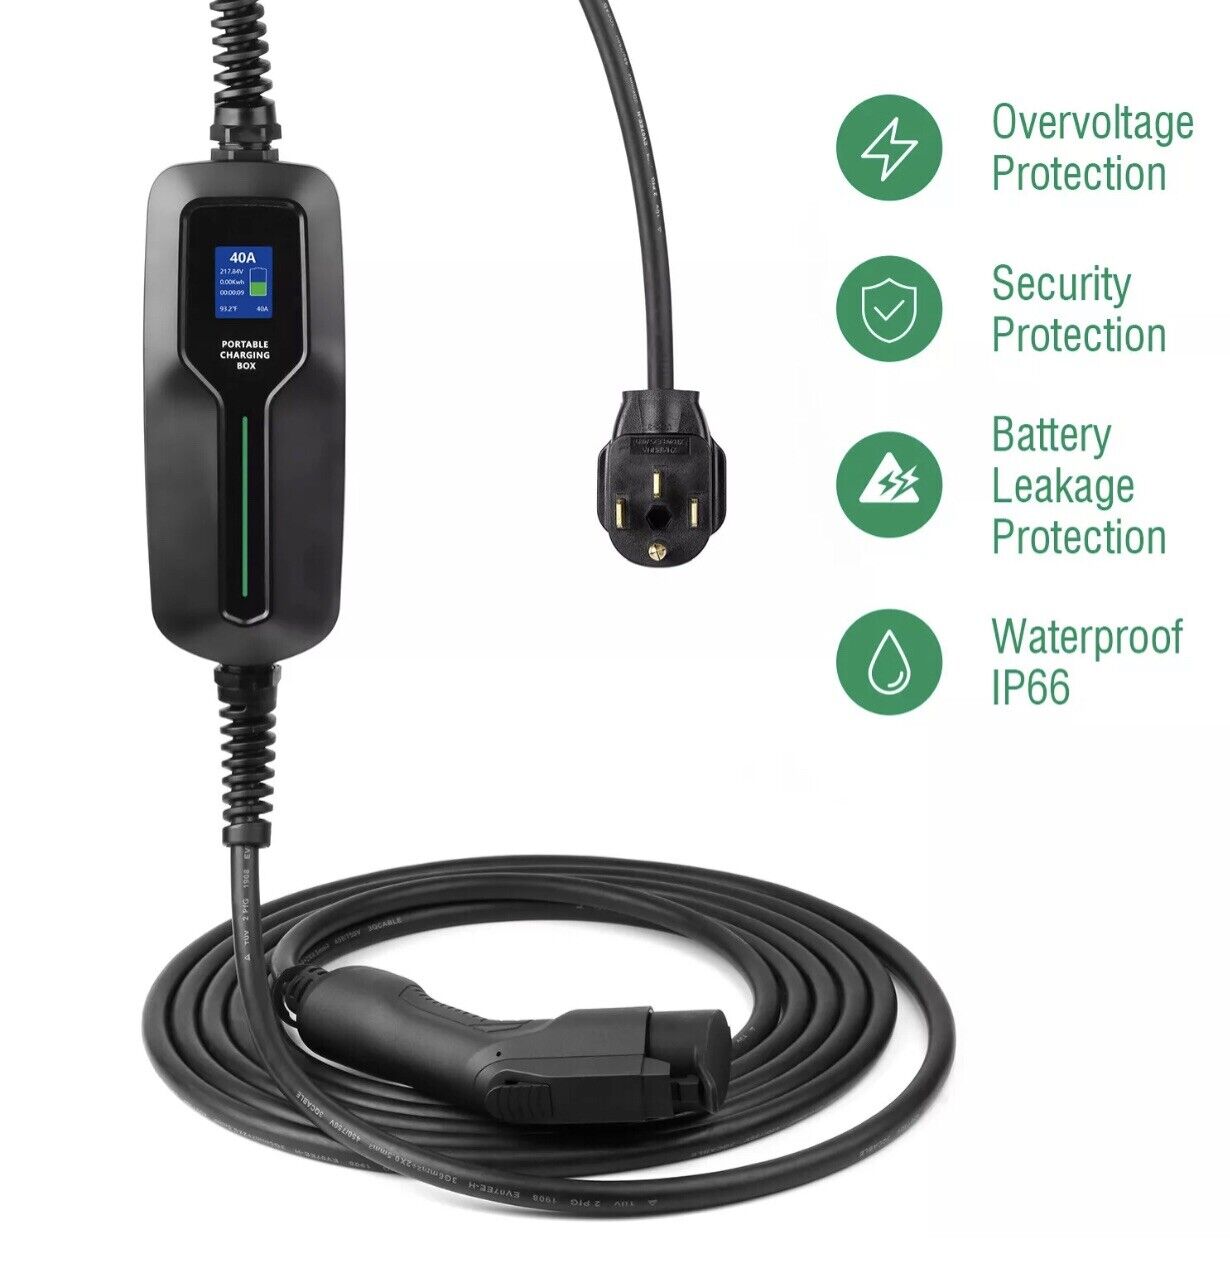 Portable 40Amp Electric Vehicle Charger EV Car Charging Cable Level 2 NEMA 14-50